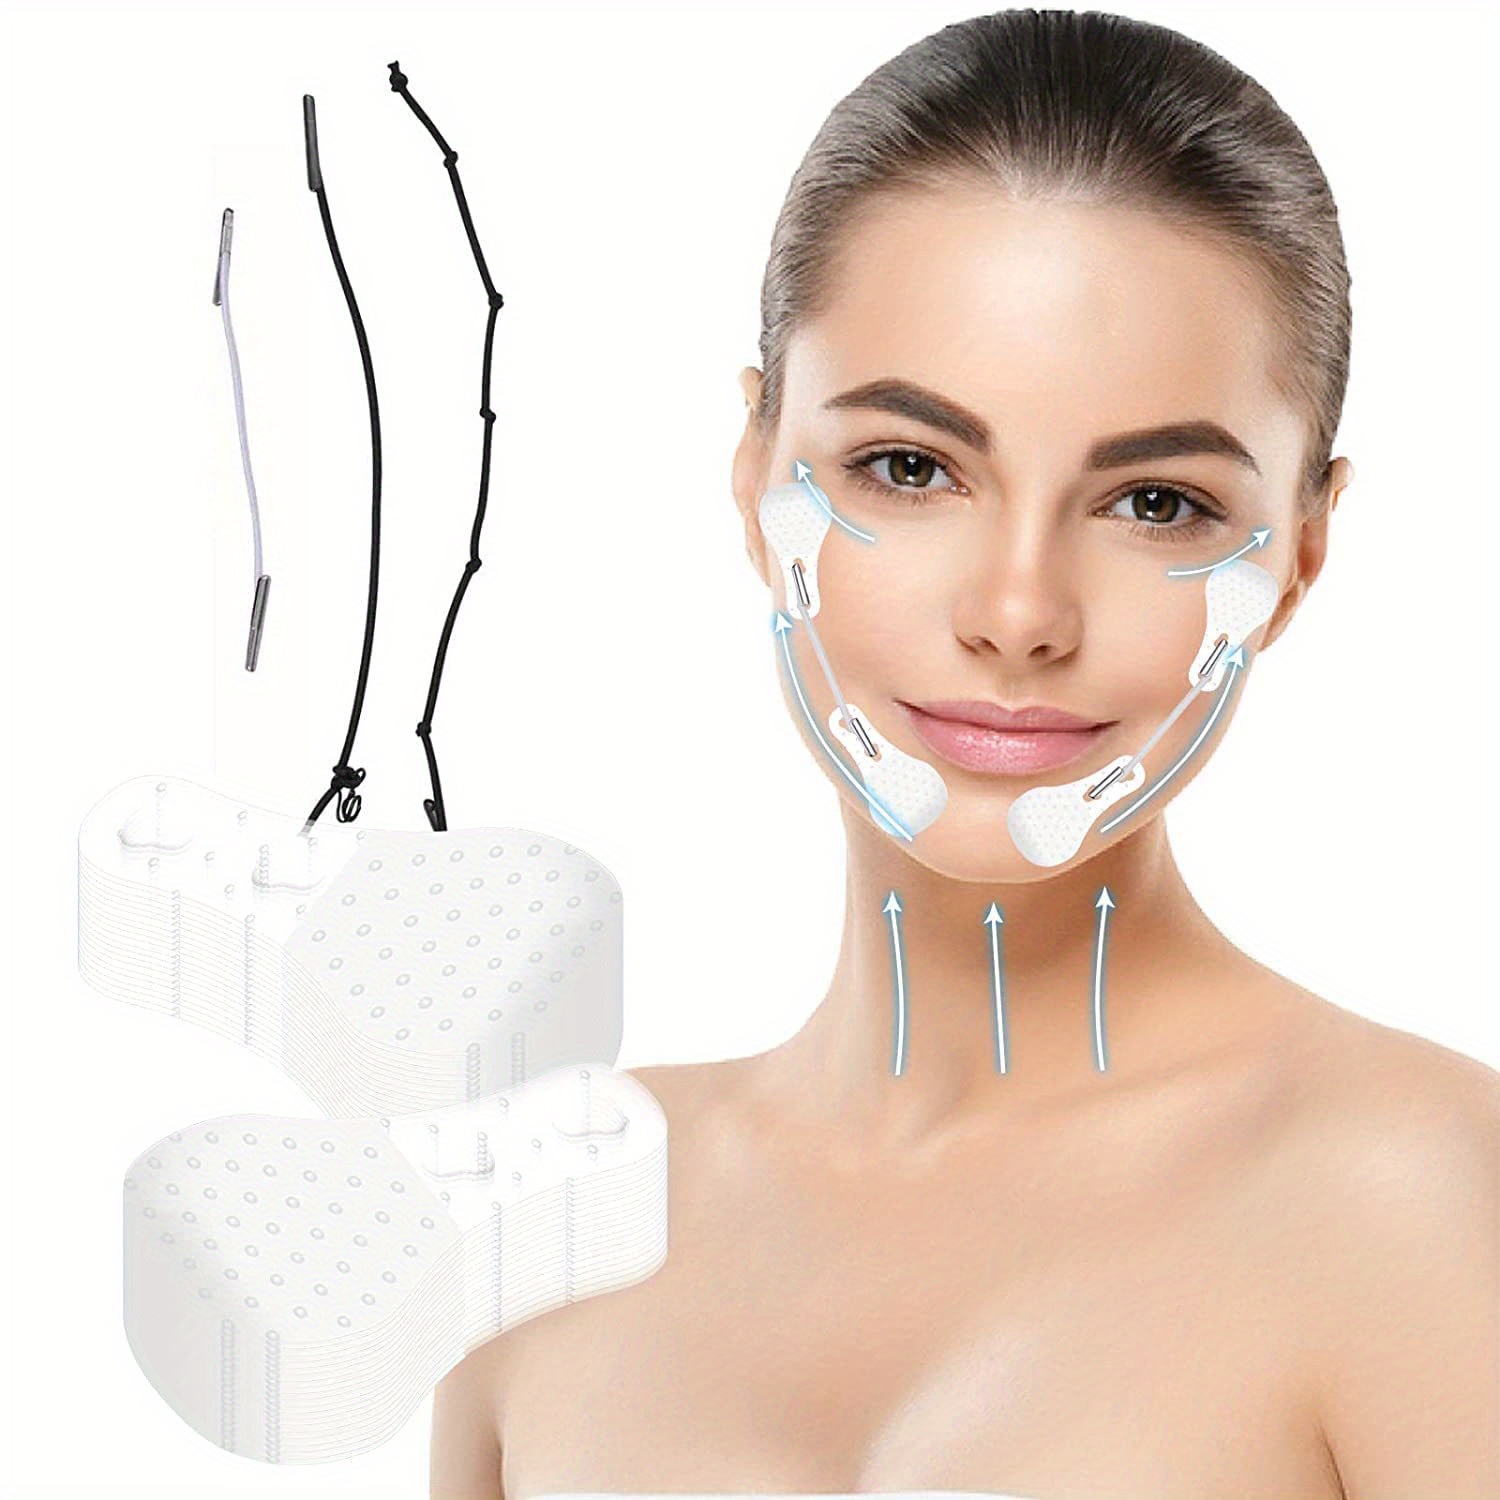 Face Lift Tape, Face Tape Lifting Invisible, Makeup Neck Tape